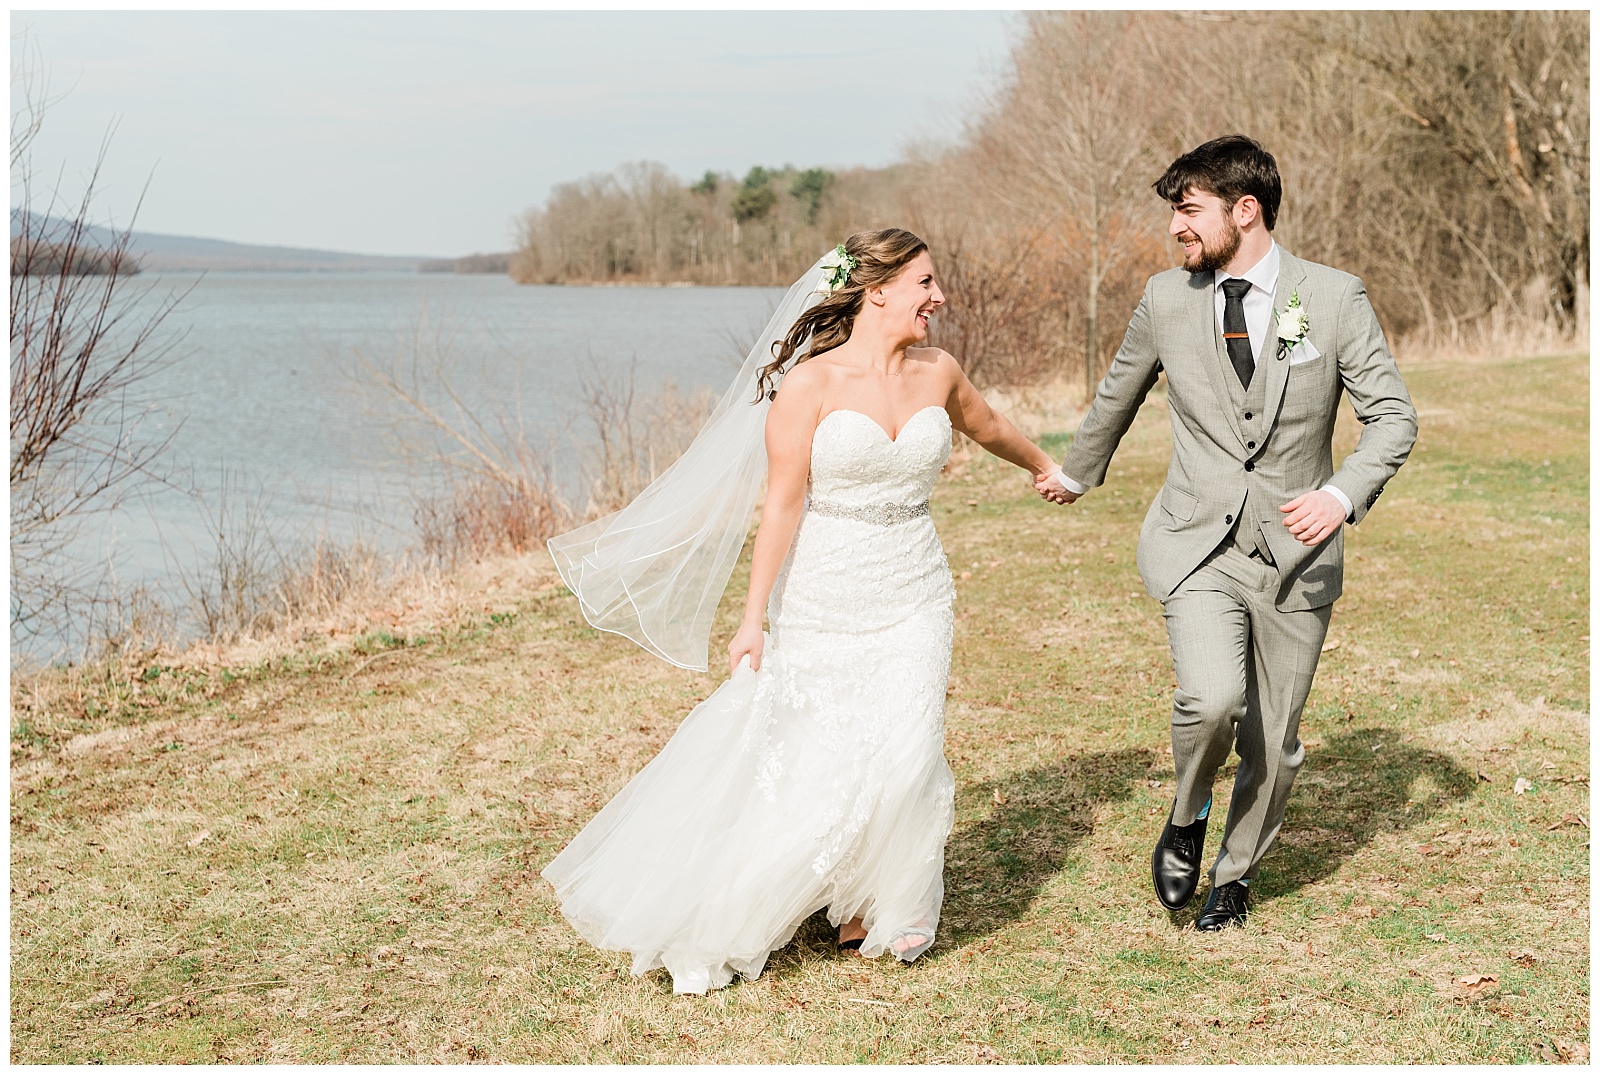 Bride and groom holding hands running next to a lake.